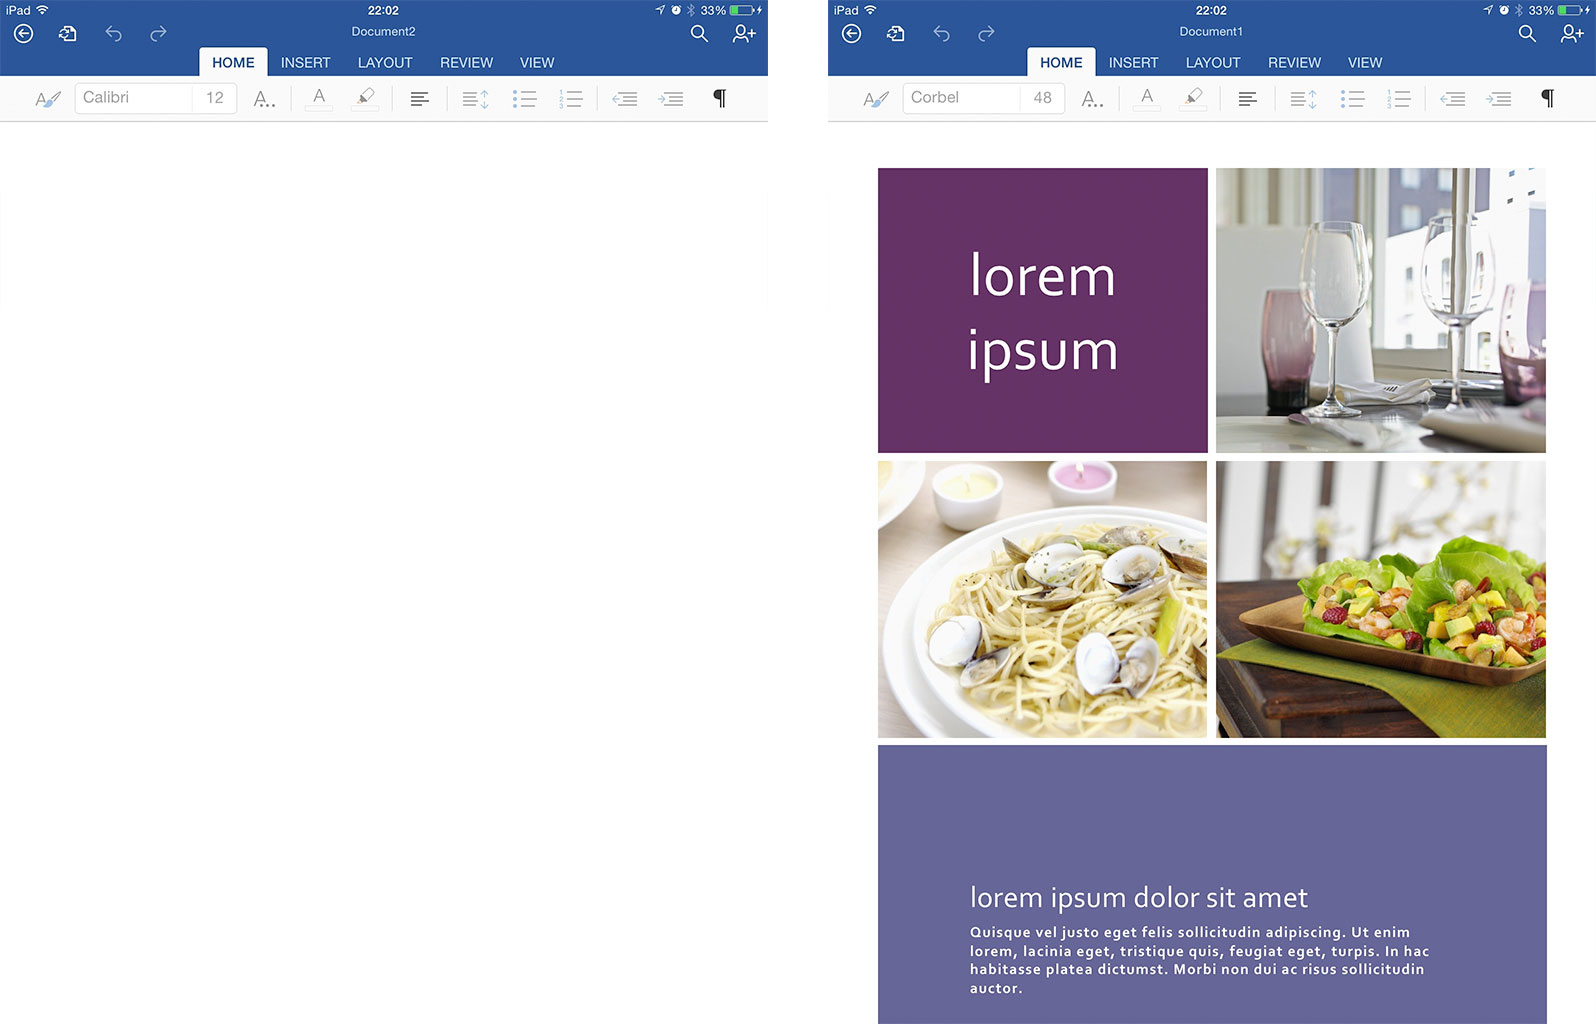 Best document editing apps for iPad: Microsoft Word